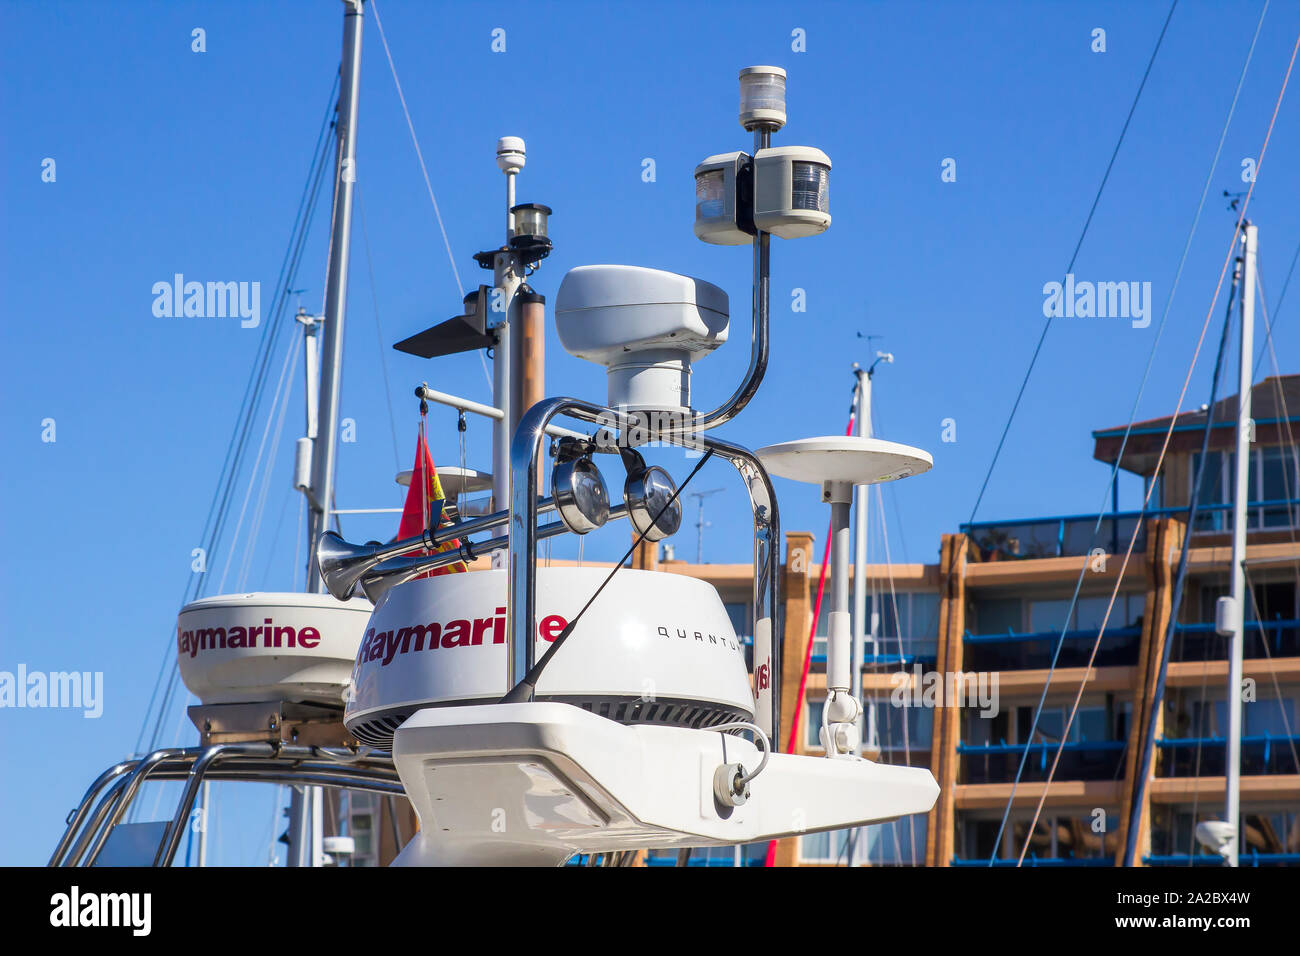 18 September 2019 Close up of  Baymarine radar equipment on a boat in the Port Solent Marina in Hampshire on the South Coast of England Stock Photo